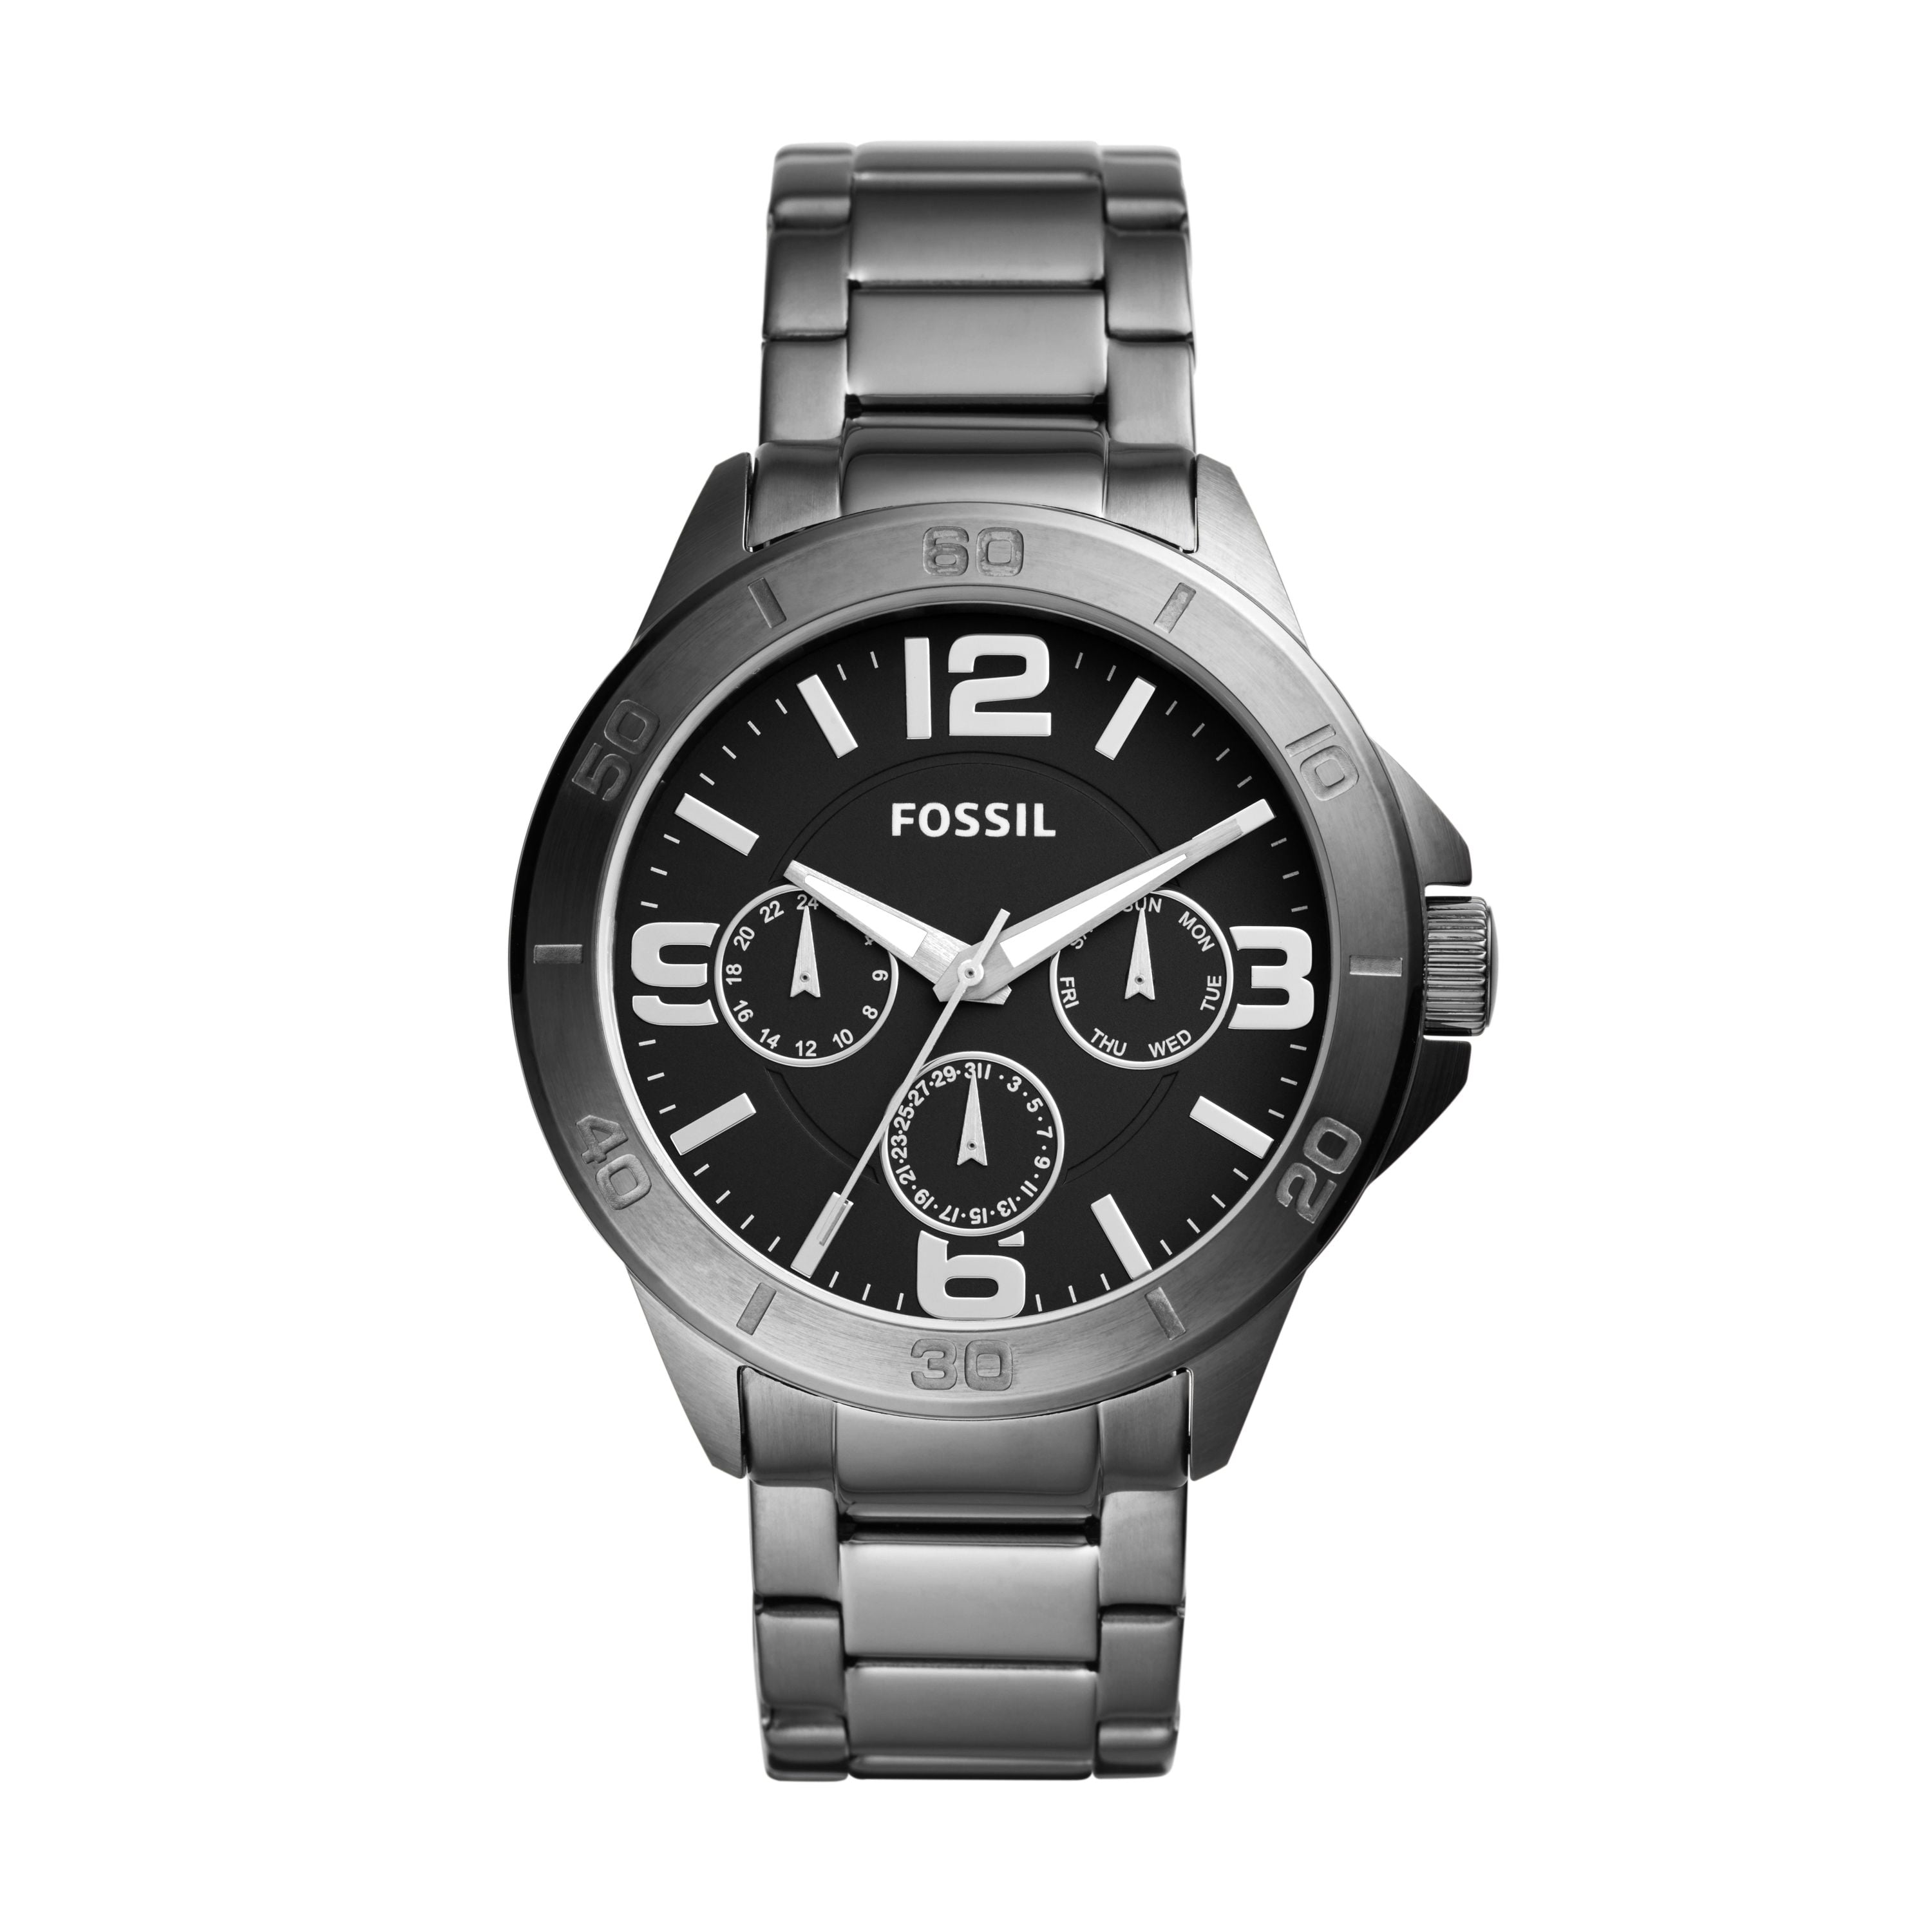 Fossil Men's Privateer Sport Smoke Stainless Steel Watch (Style: BQ2297 ...